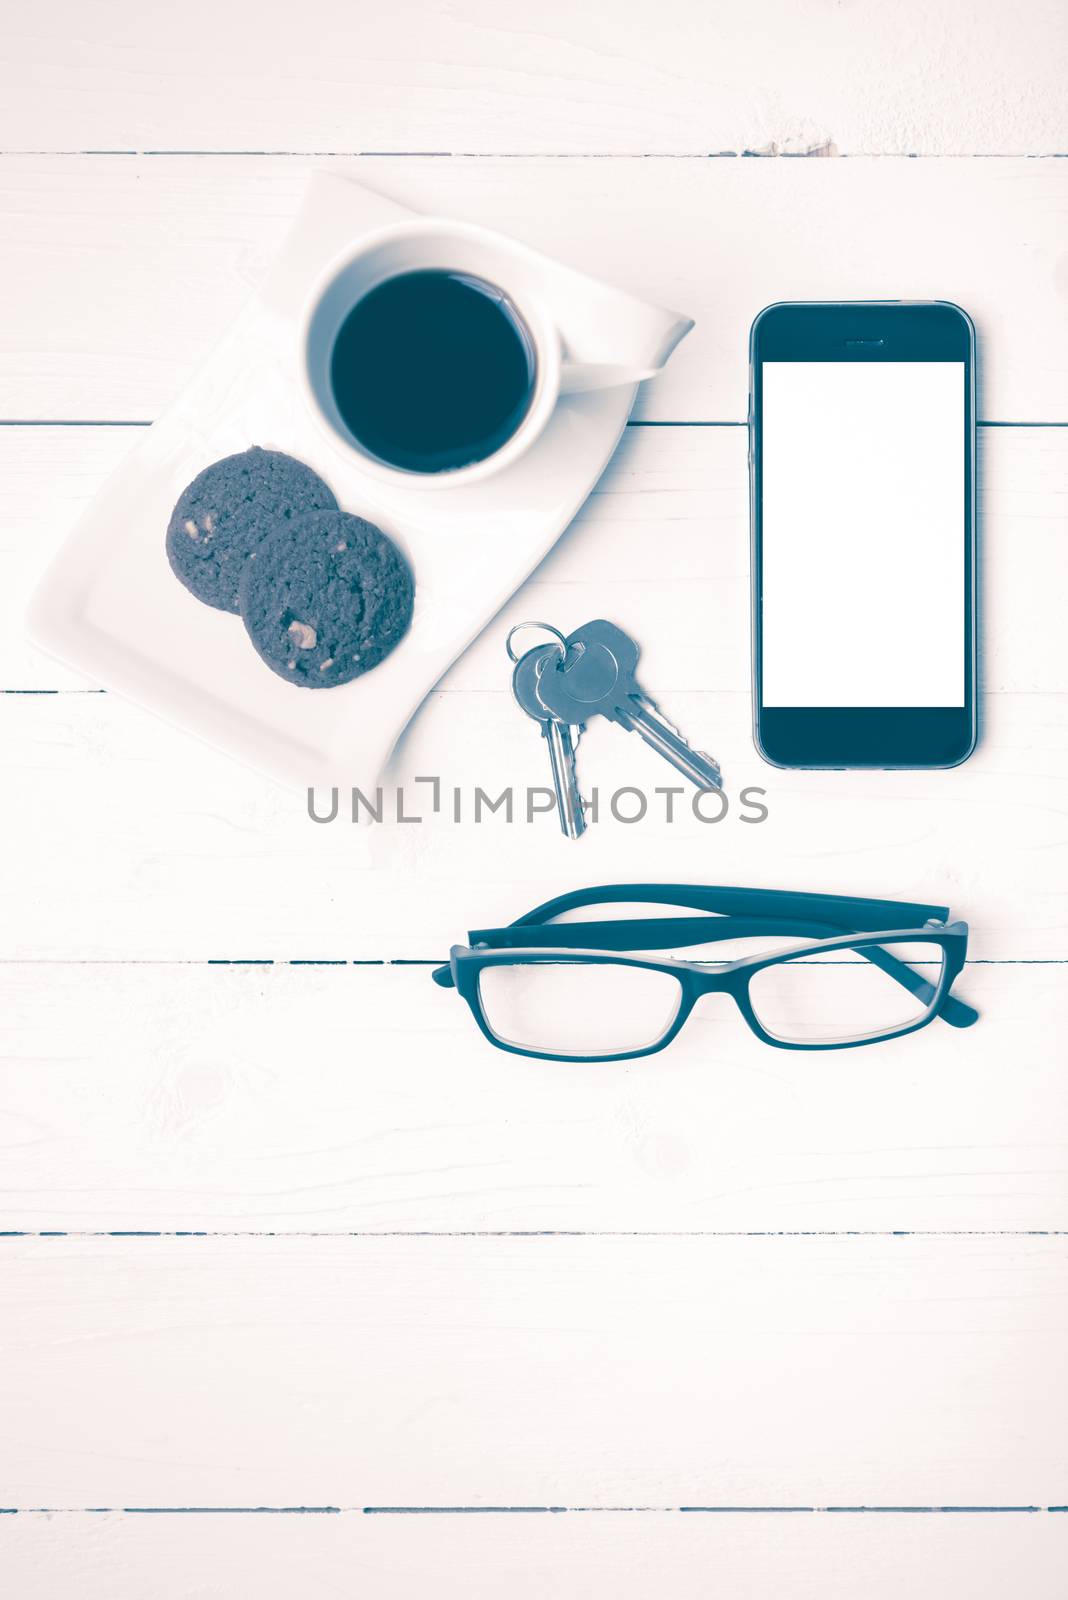 coffee cup with cookie,phone,eyeglasses and key on white wood background vintage style